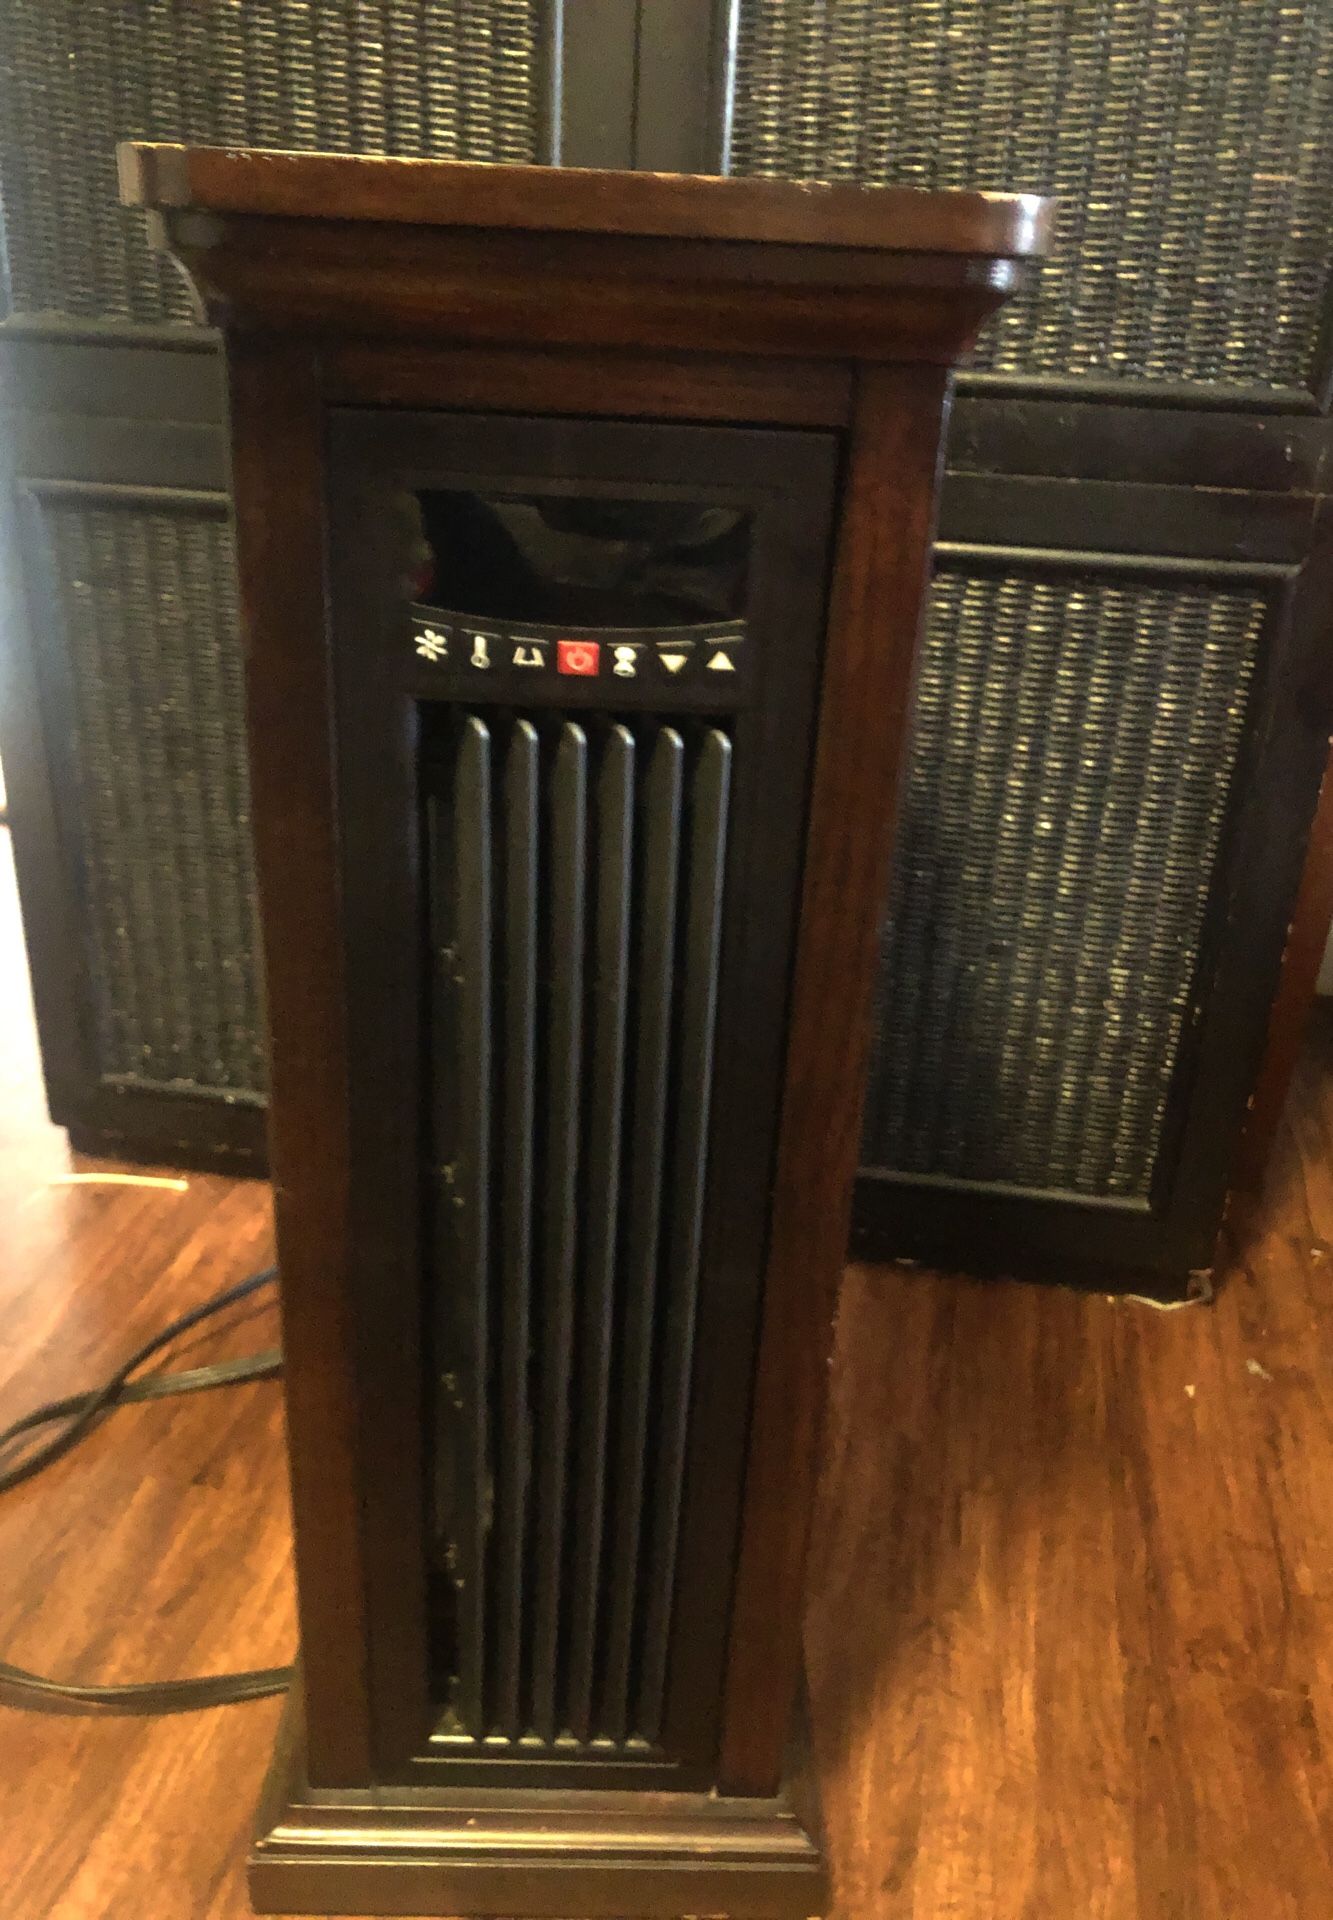 Name your price moving Heater and fan tower asking 65